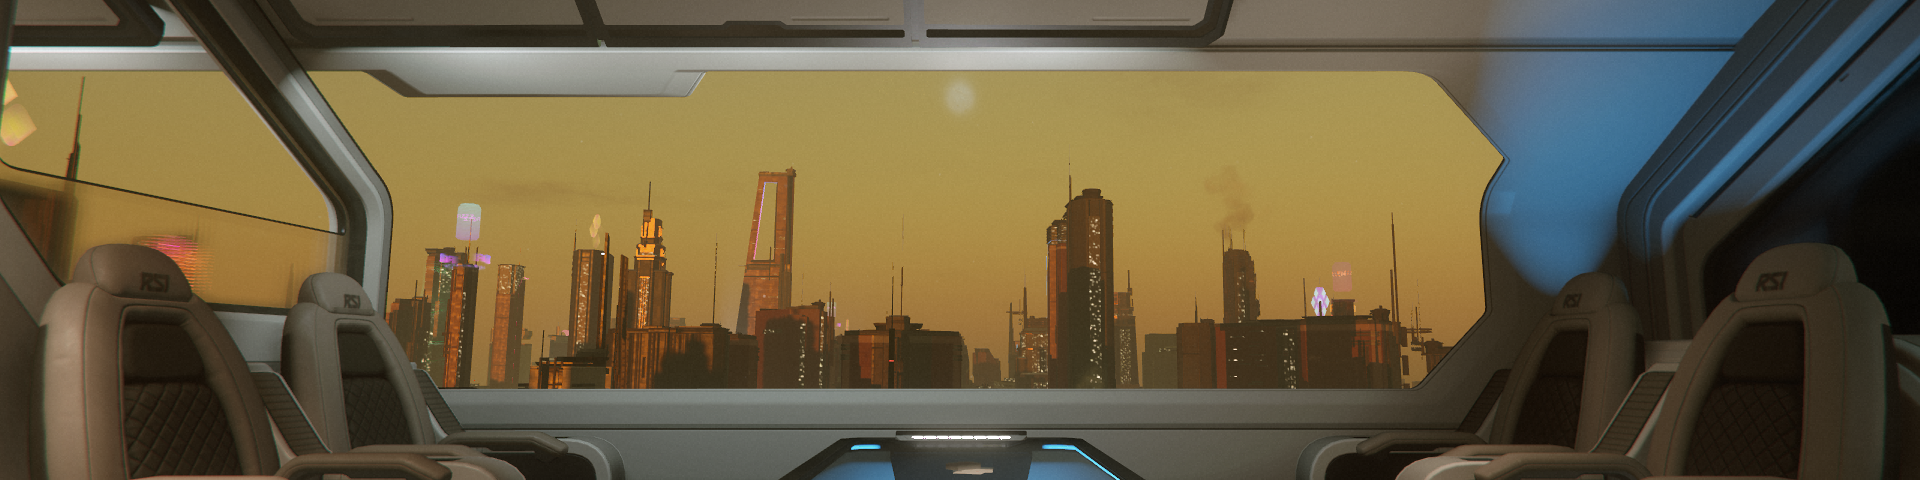 City skyline seen through the window of a space ship landed on a rooftop pad.